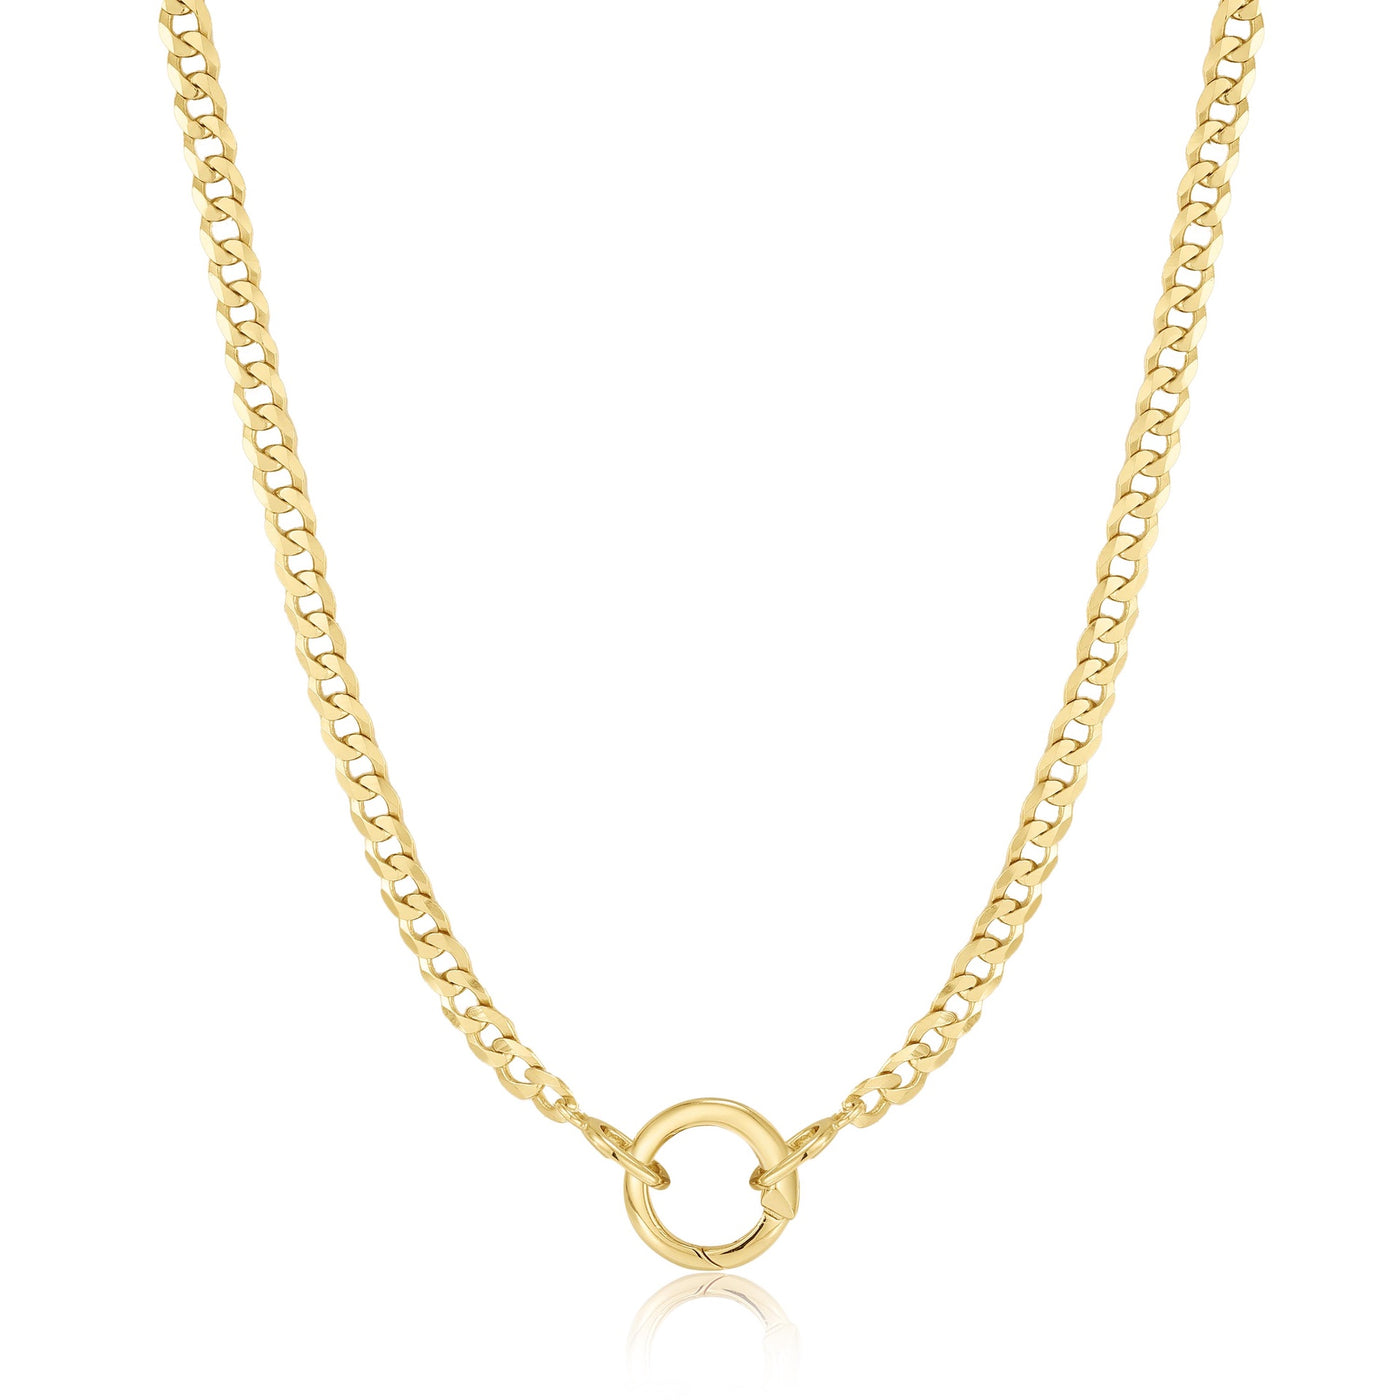 Pop Charms - Gold Curb Chain Charm Connector Necklace